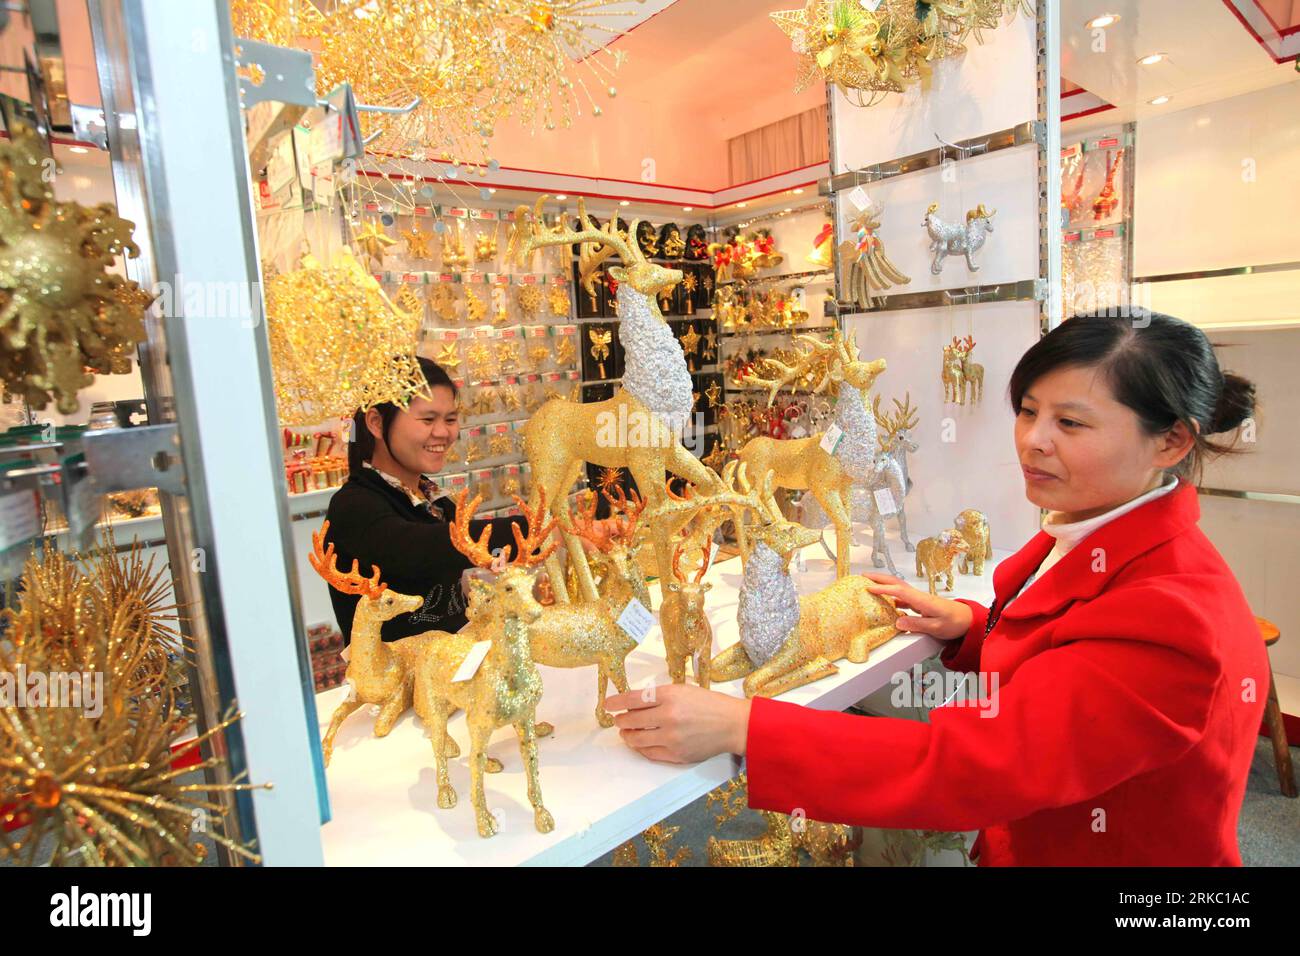 Bildnummer: 54638632  Datum: 12.11.2010  Copyright: imago/Xinhua (101115) -- WENZHOU, Nov. 15, 2010 (Xinhua) -- Manufacturers sorts newly designed Christmas ornaments in Ruian City of east China s Zhejiang Province, on Nov. 12, 2010. As the world gets ready to celebrate the West s biggest festival, Christmas, next month, Chinese toymakers are not so cheery, as the appreciation of Chinese currency Yuan crimps their already paper-thin profits. Around 80 percent of the world s Christmas toys, trees and decorations are churned out of factories in southern China. Despite the huge market share, Chin Stock Photo